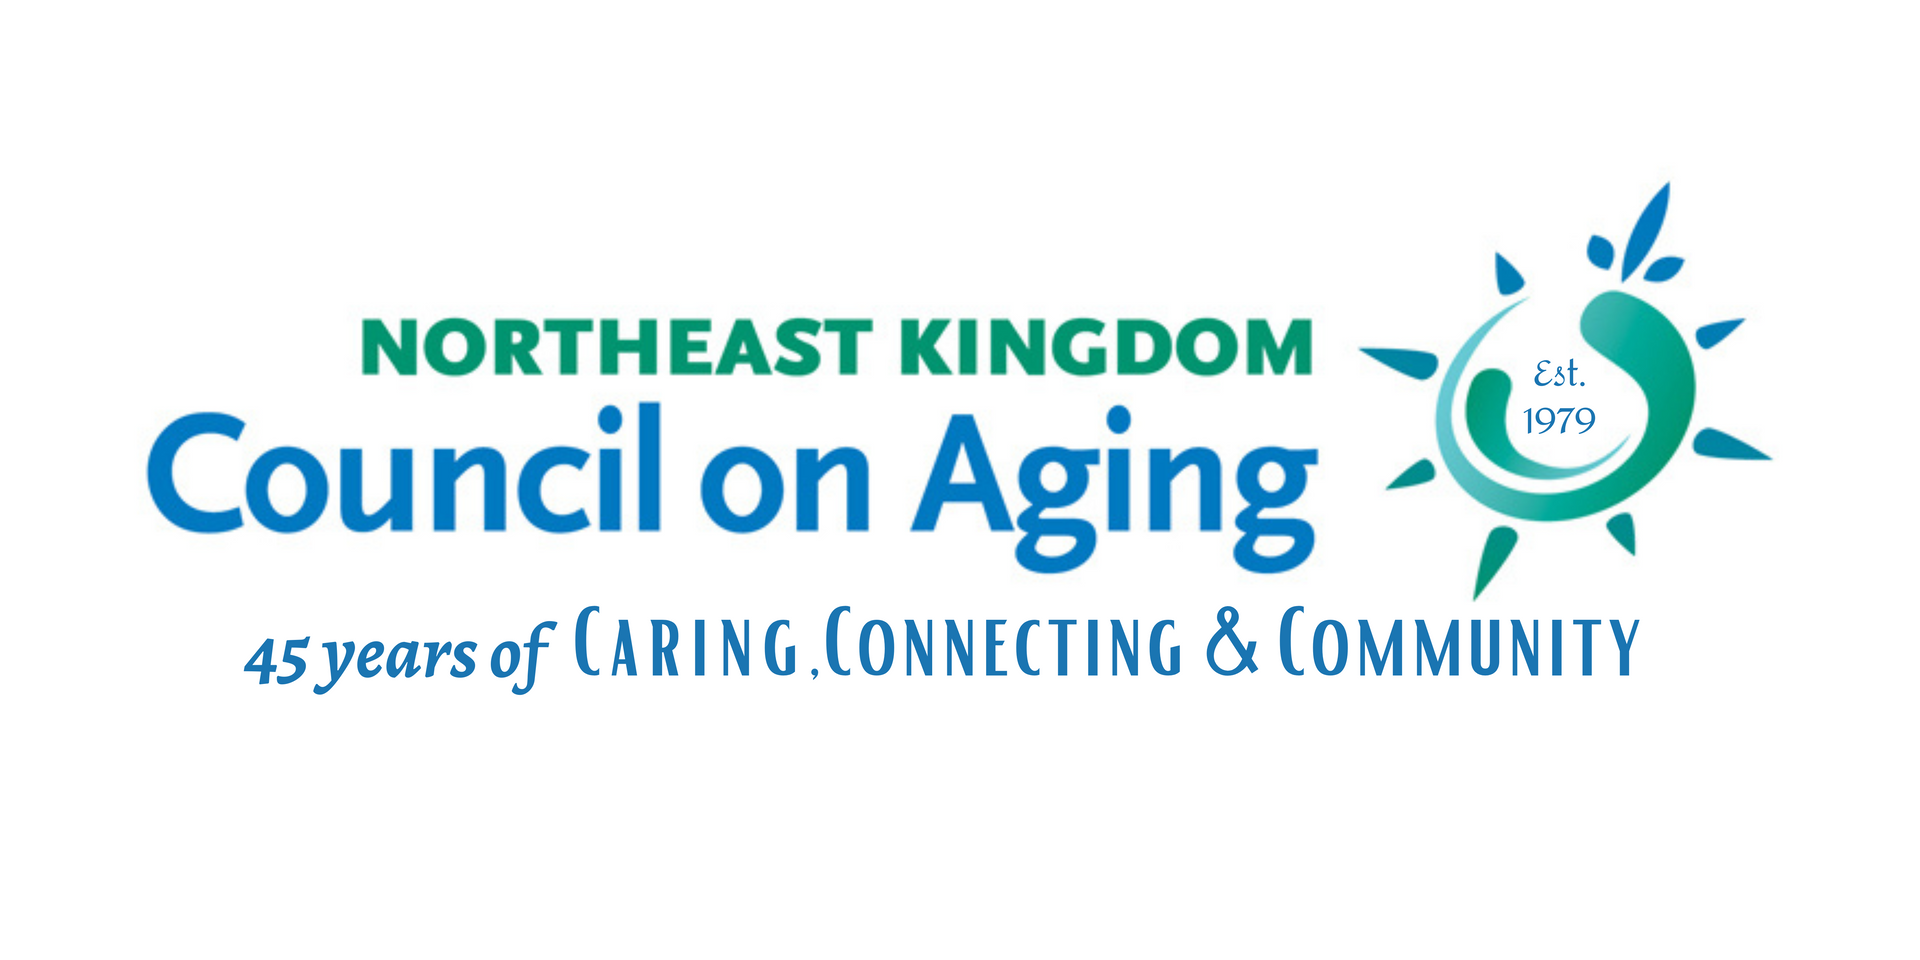 Northeast Kingdom Council on Aging in Vermont